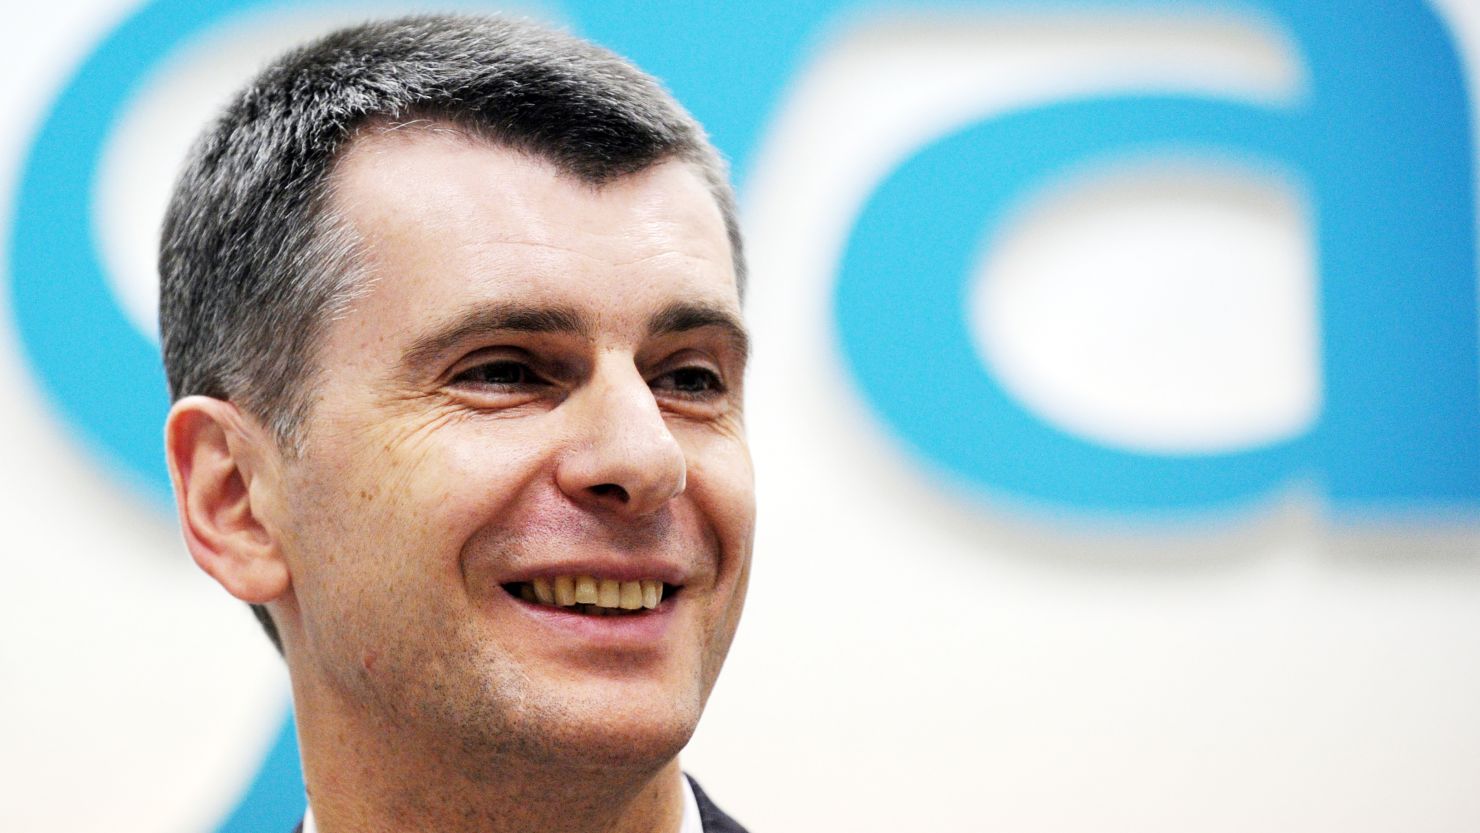 Mikhail Prokhorov has a lot of money, but oligarchs like him have not fared well against Russia's powerful elite.